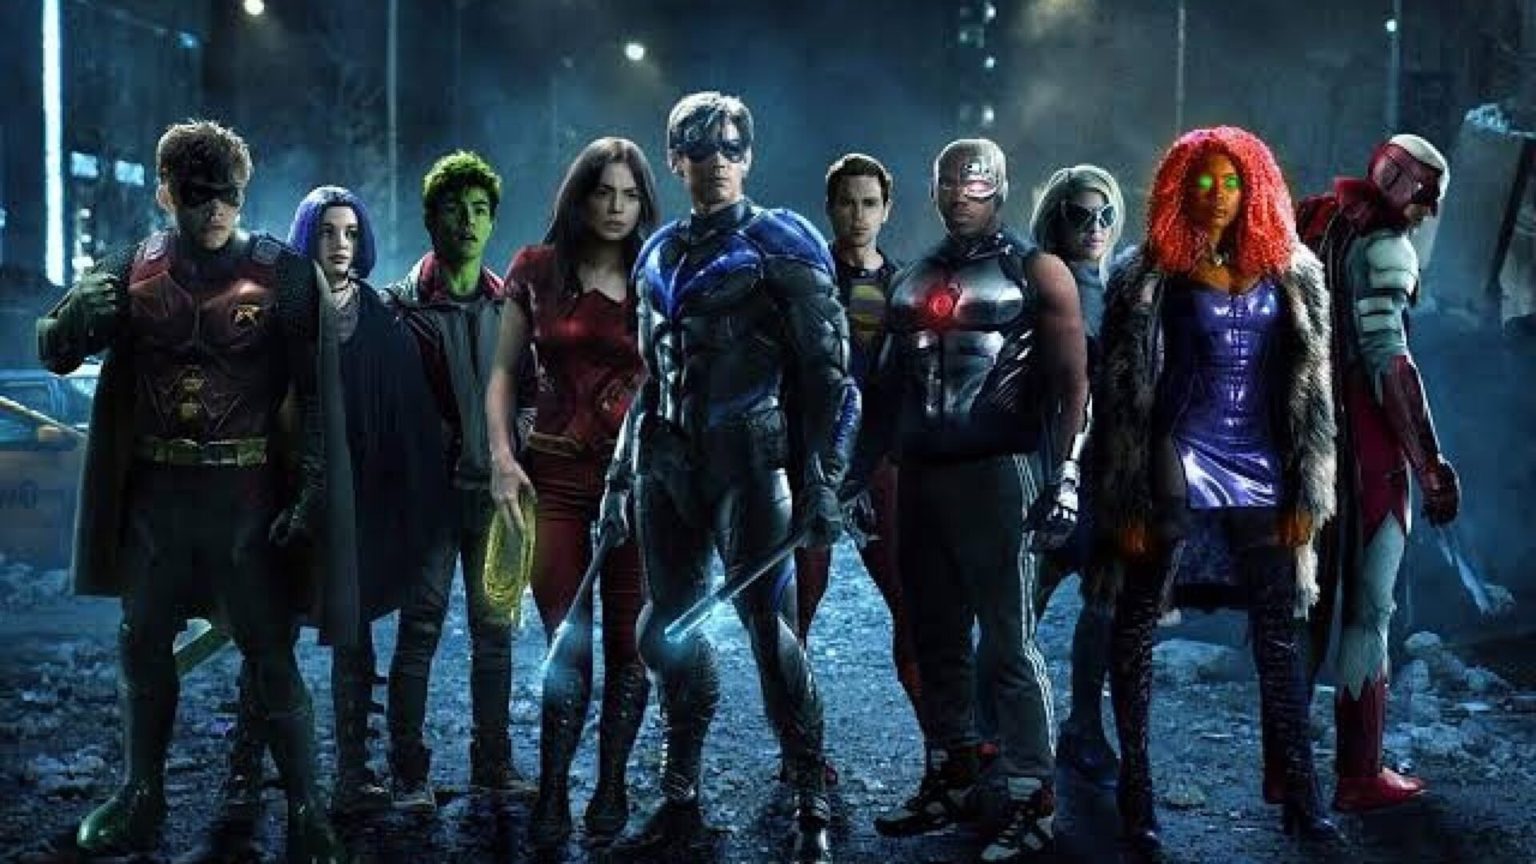 Titans Season 3 Release Date Cast Watch Online Streaming On HBO Max